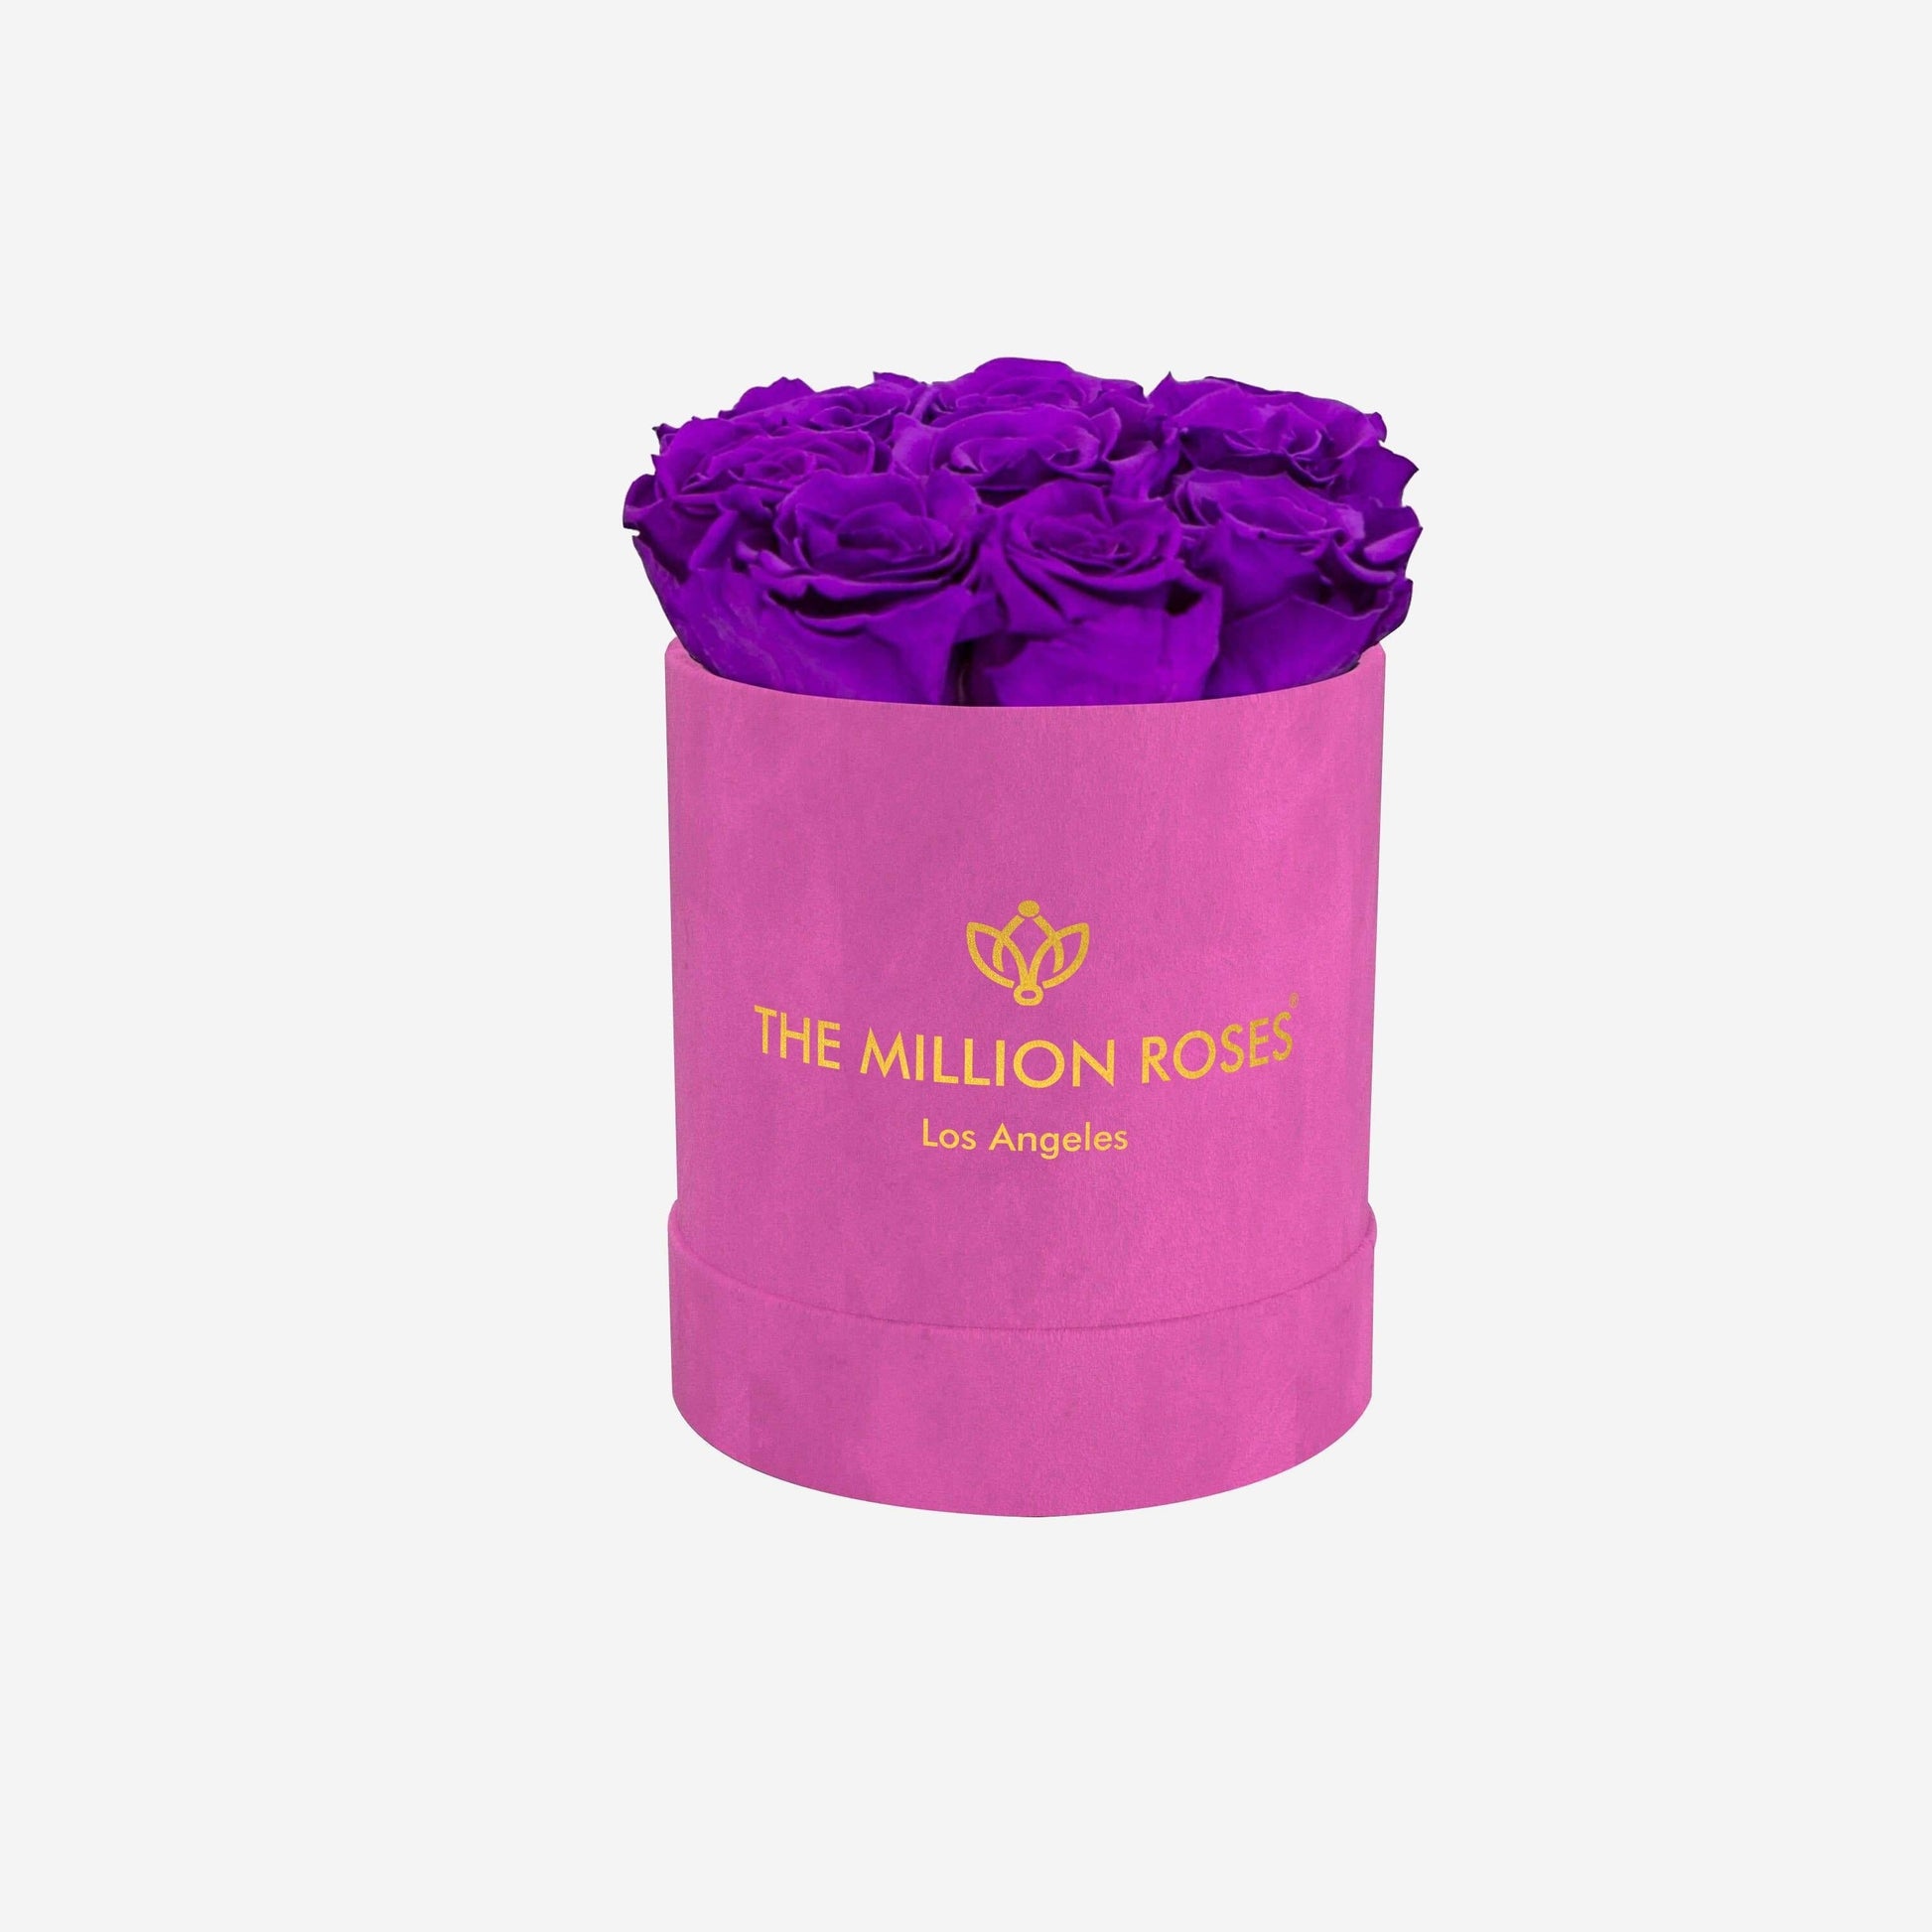 Basic Hot Pink Suede Box | Bright Purple Roses - The Million Roses